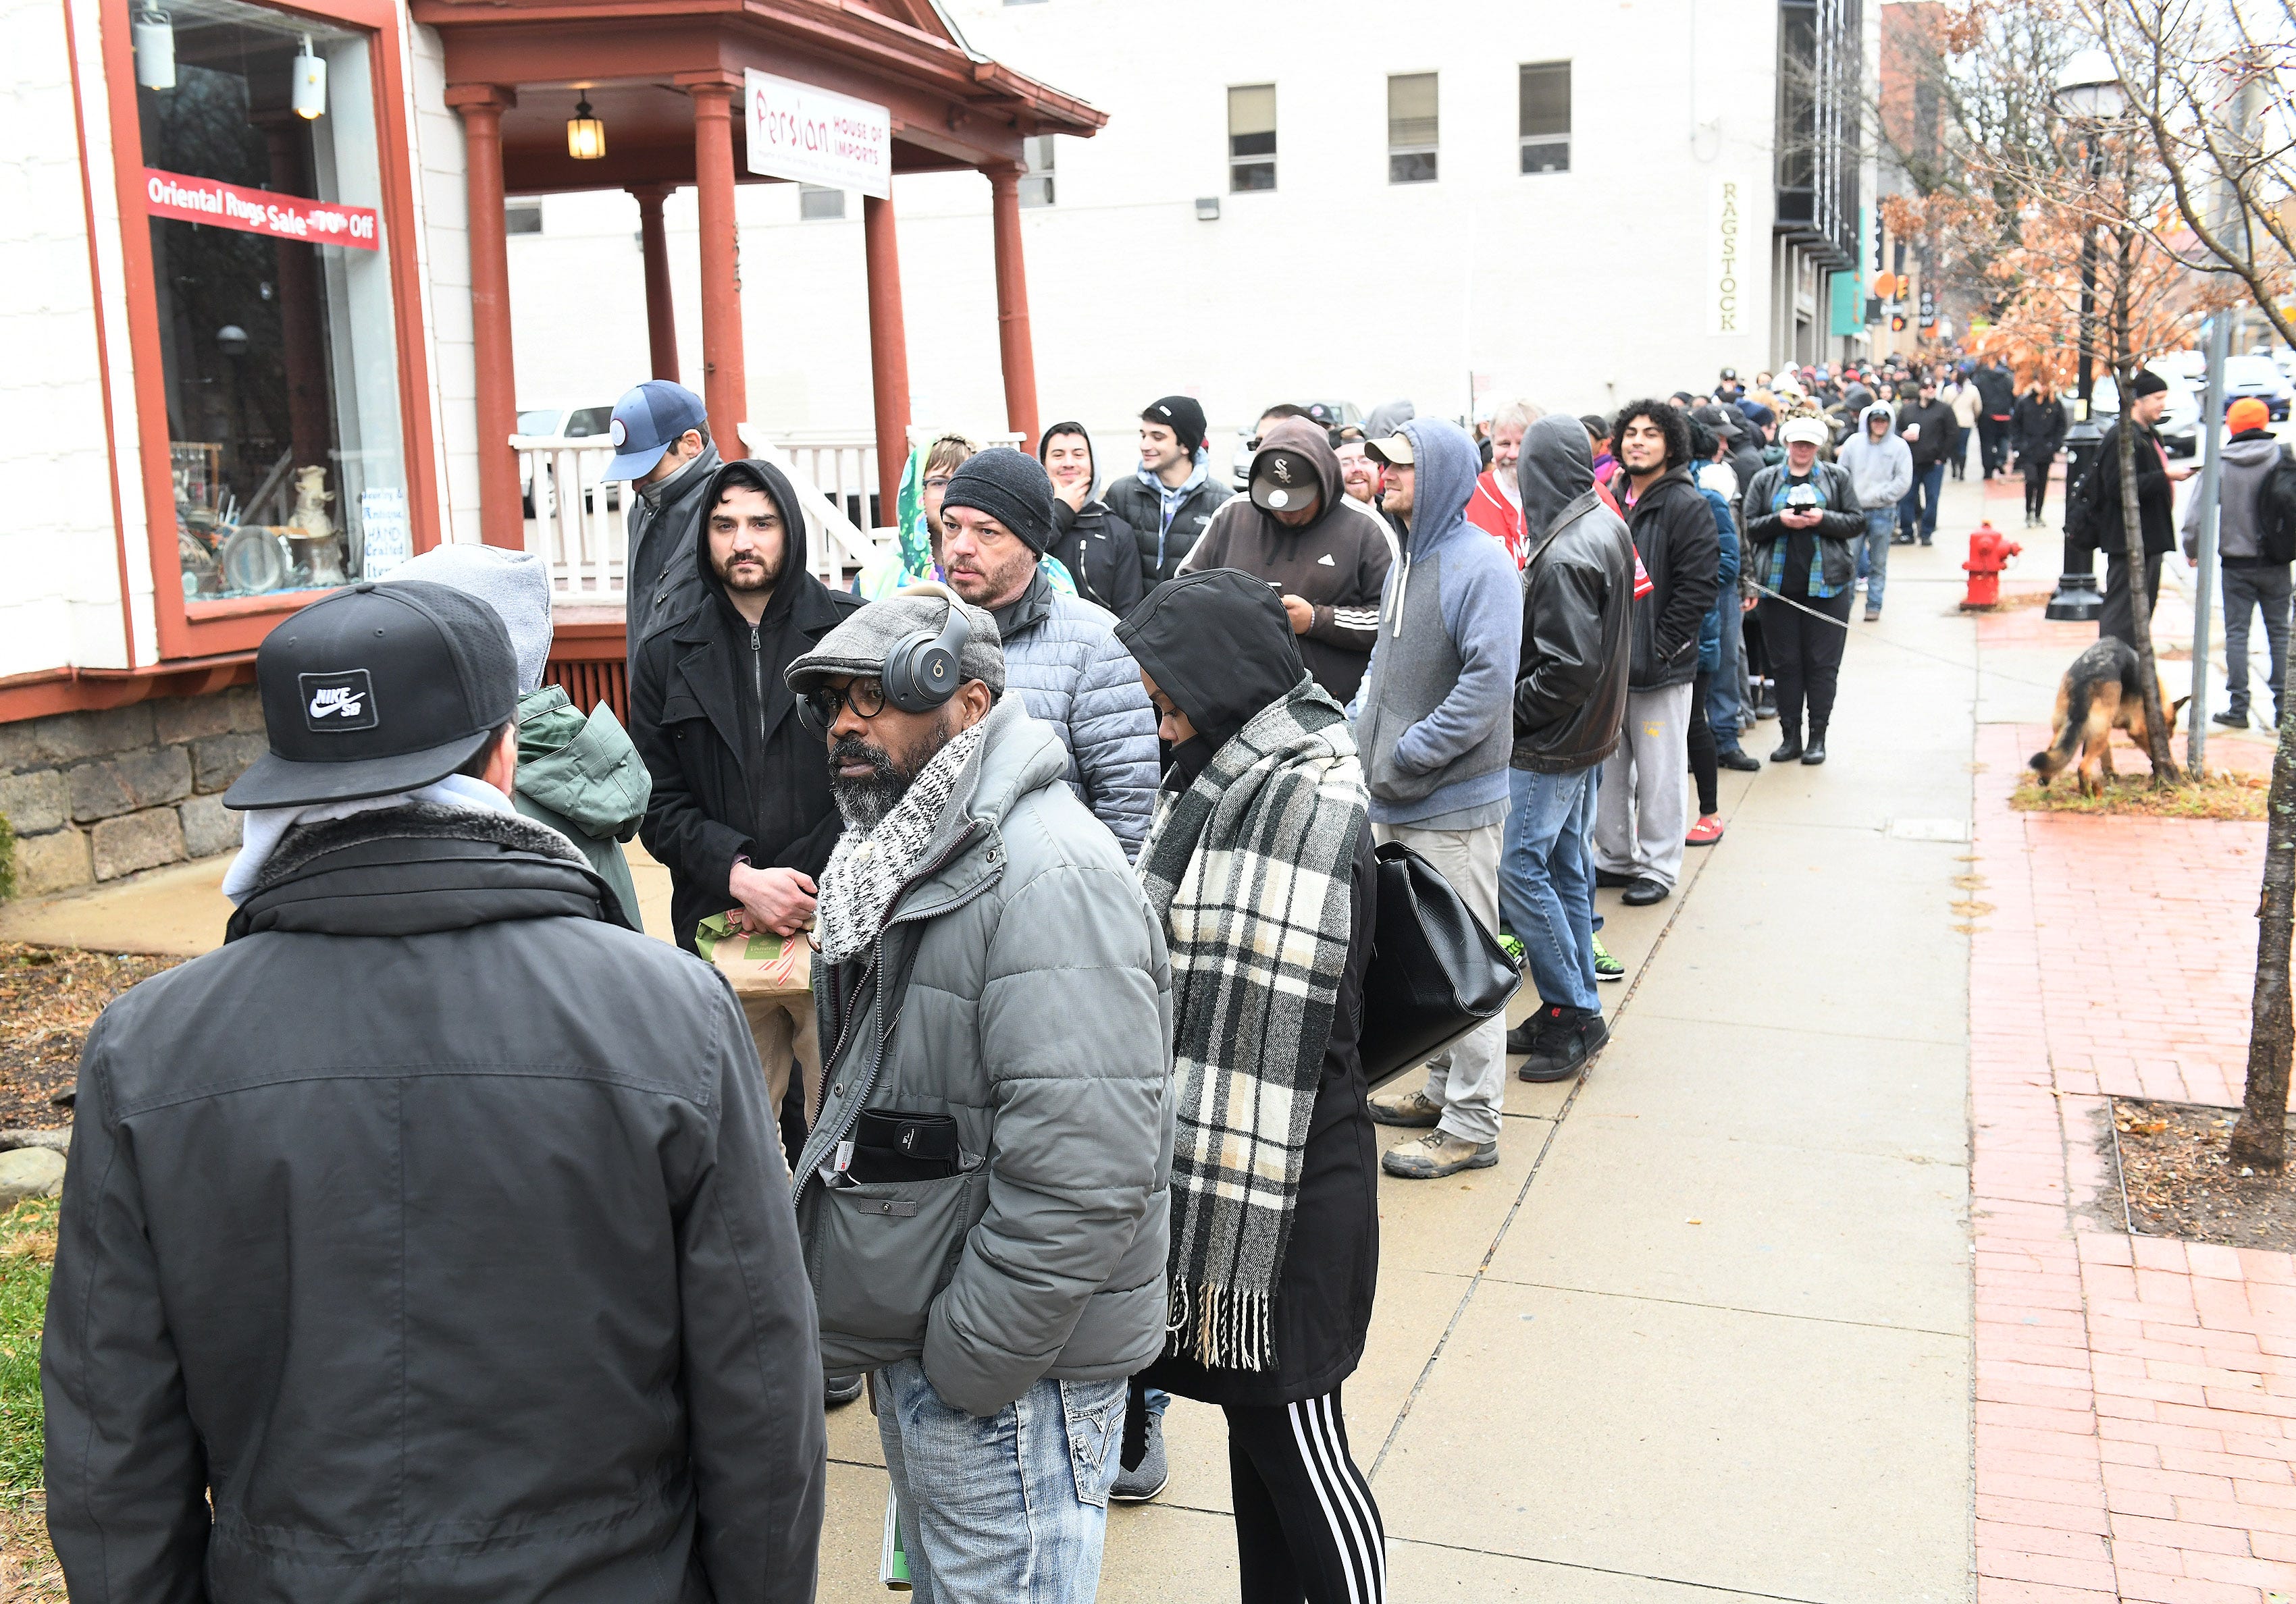 A long line stretches along a block from Arbors Wellness in Ann Arbor, Mich. on Dec. 1, 2019.  This is the first day of legal recreational marijuana sales in Michigan.